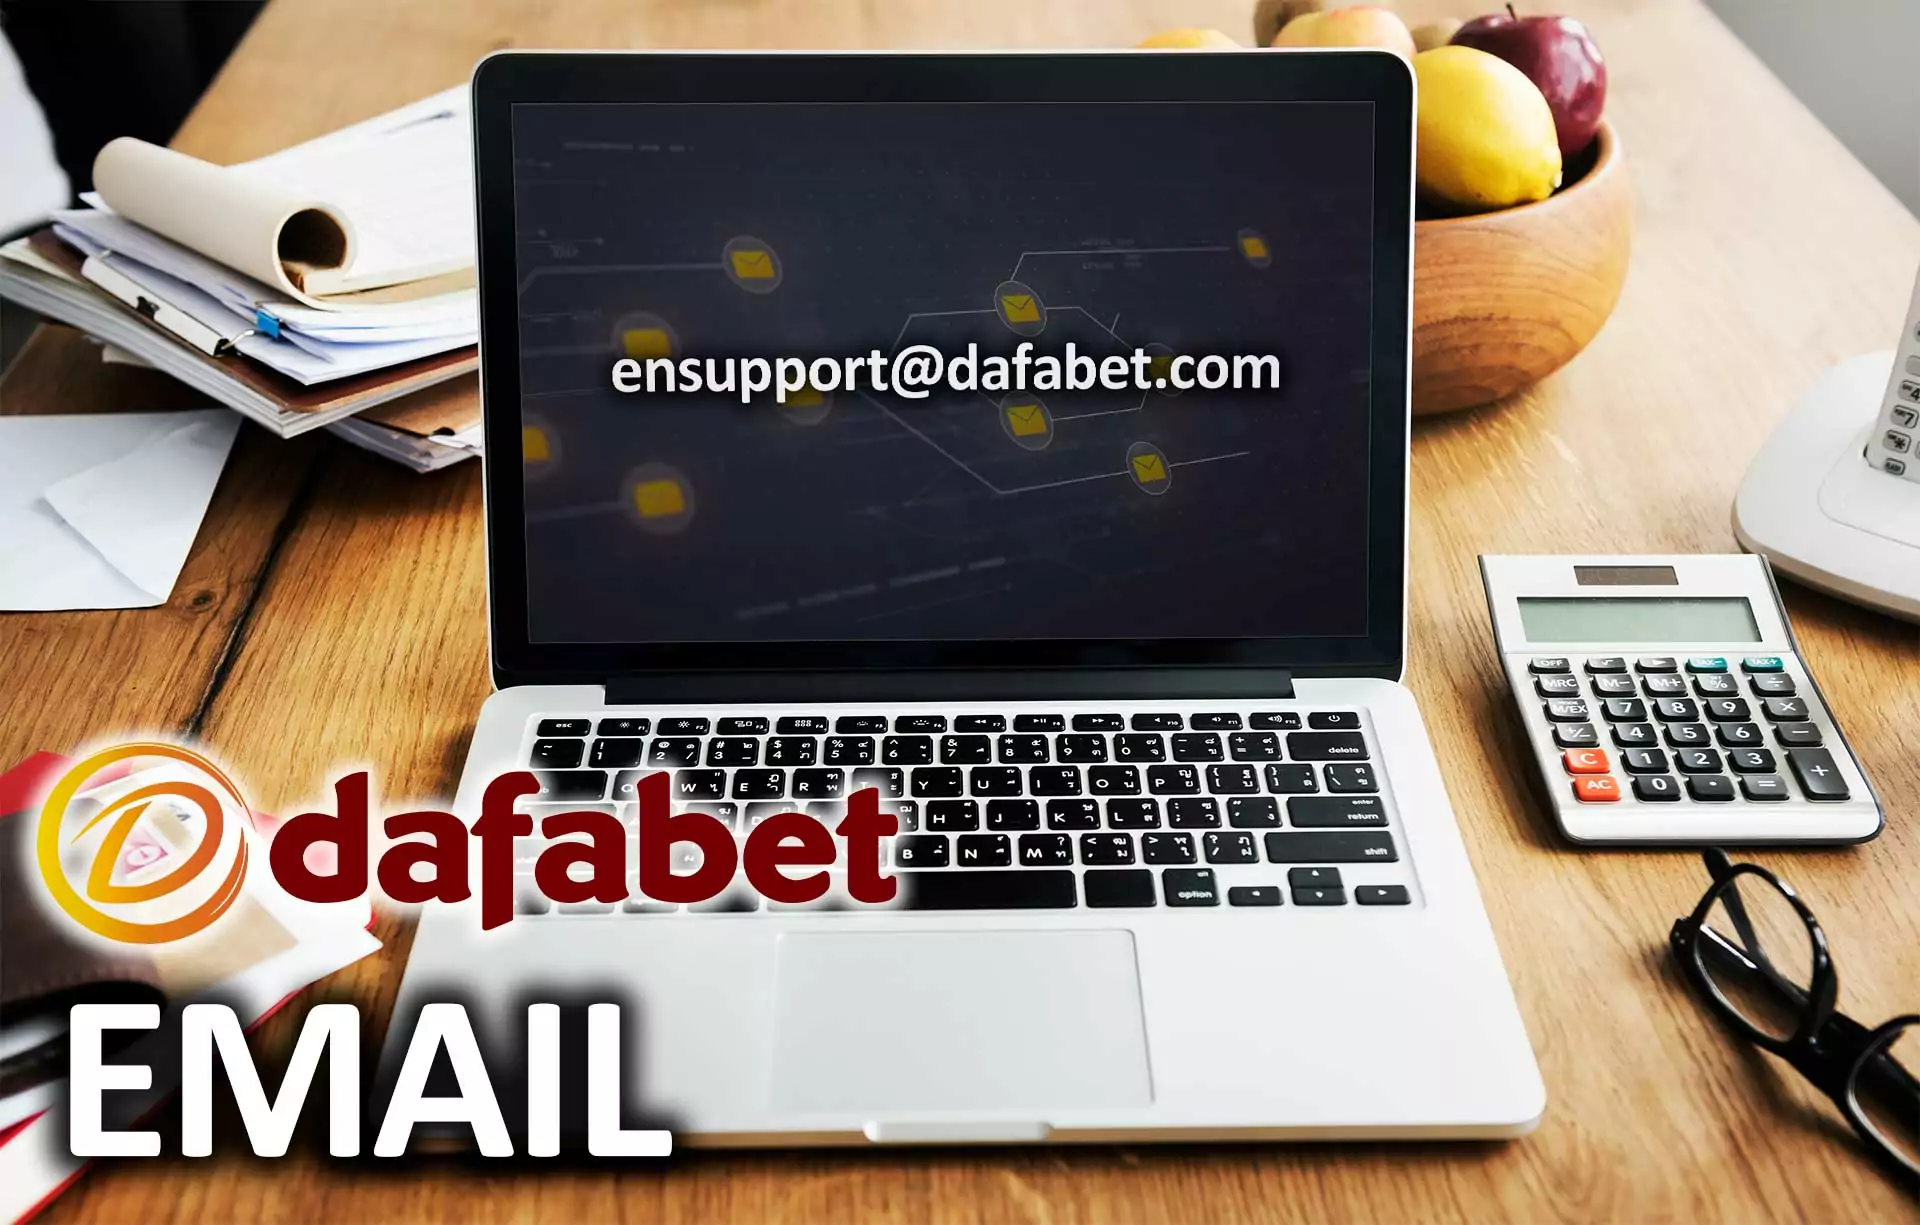 You can send the Dafabet team an email.